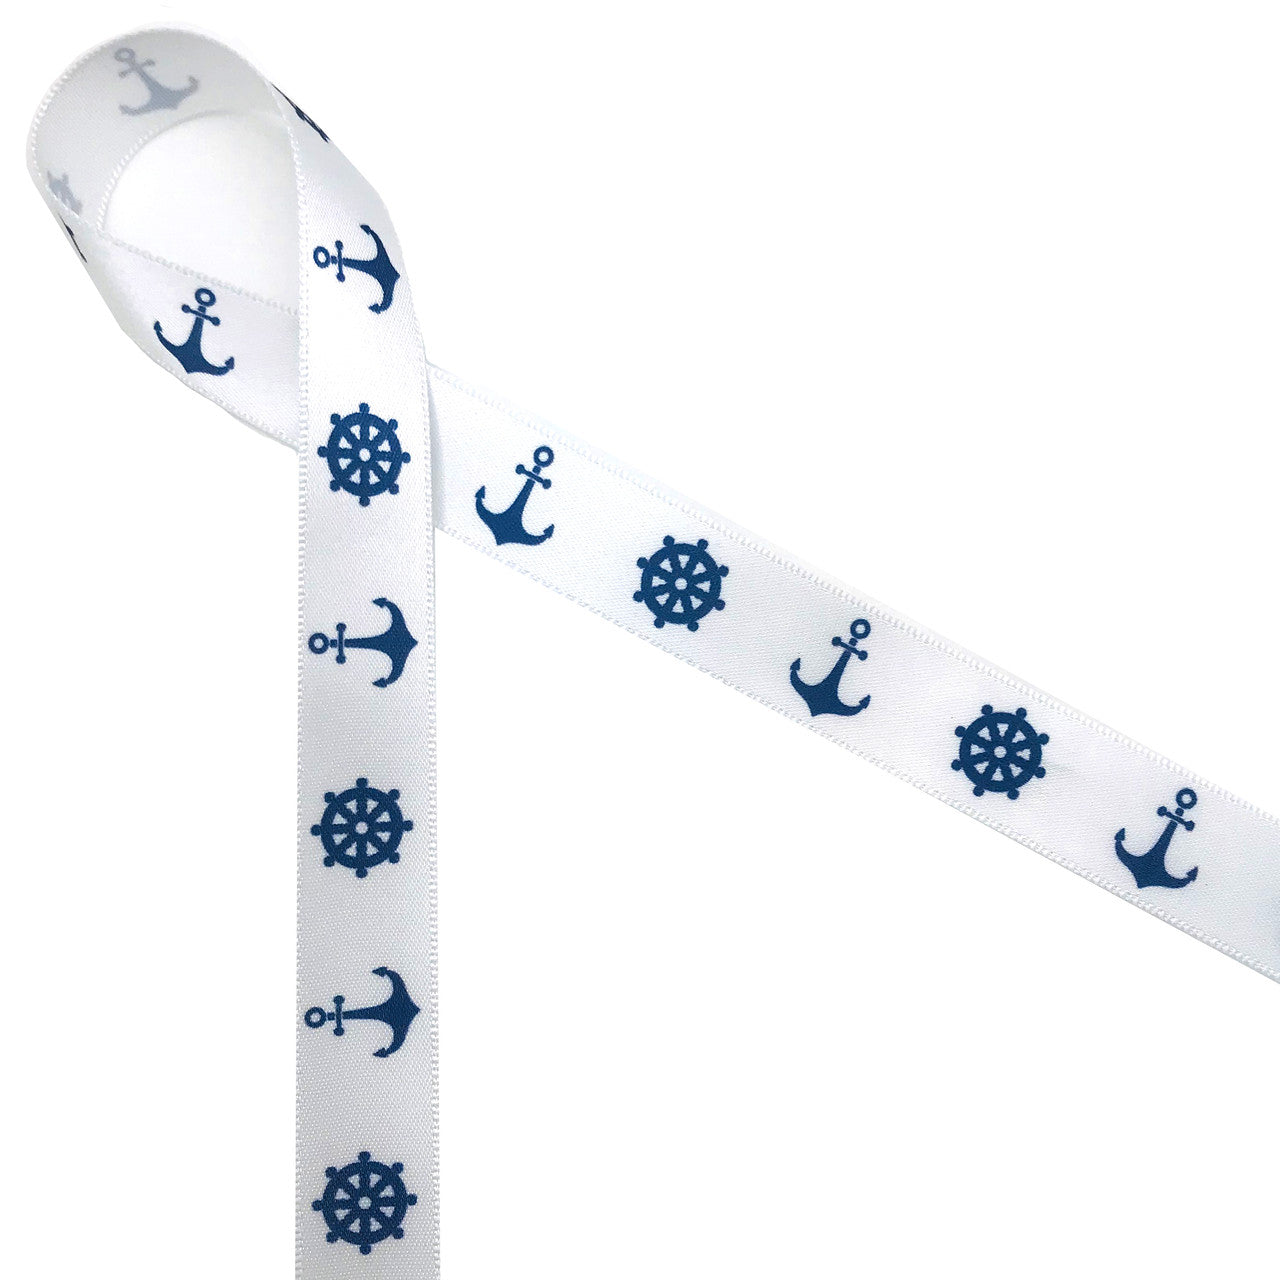 Anchors and Ship Wheels ribbon in navy blue printed on 5/8" white single face satin